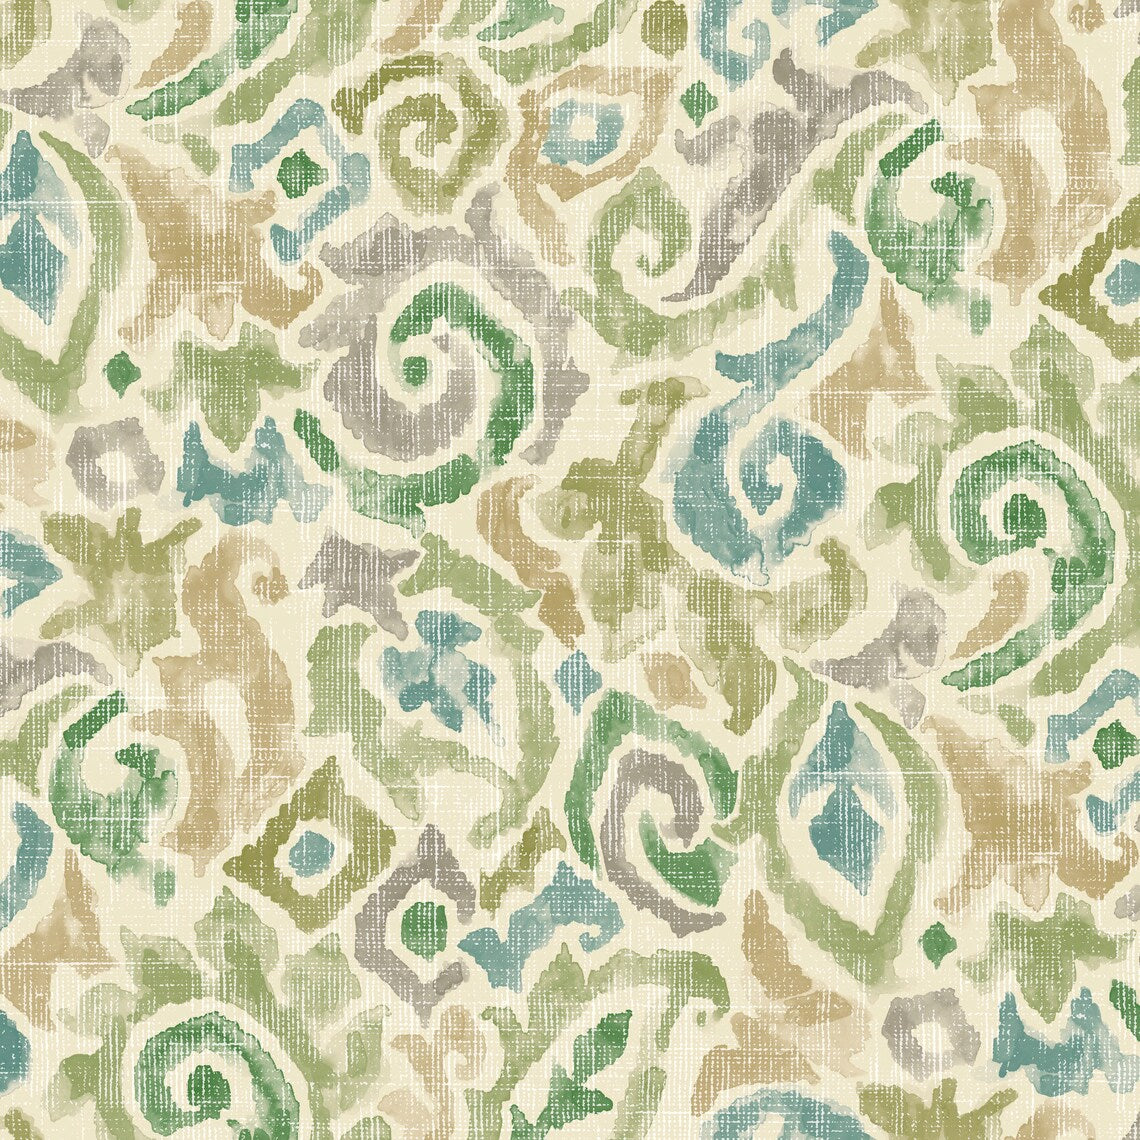 Bed Runner in Jester Bay Green Paisley Watercolor